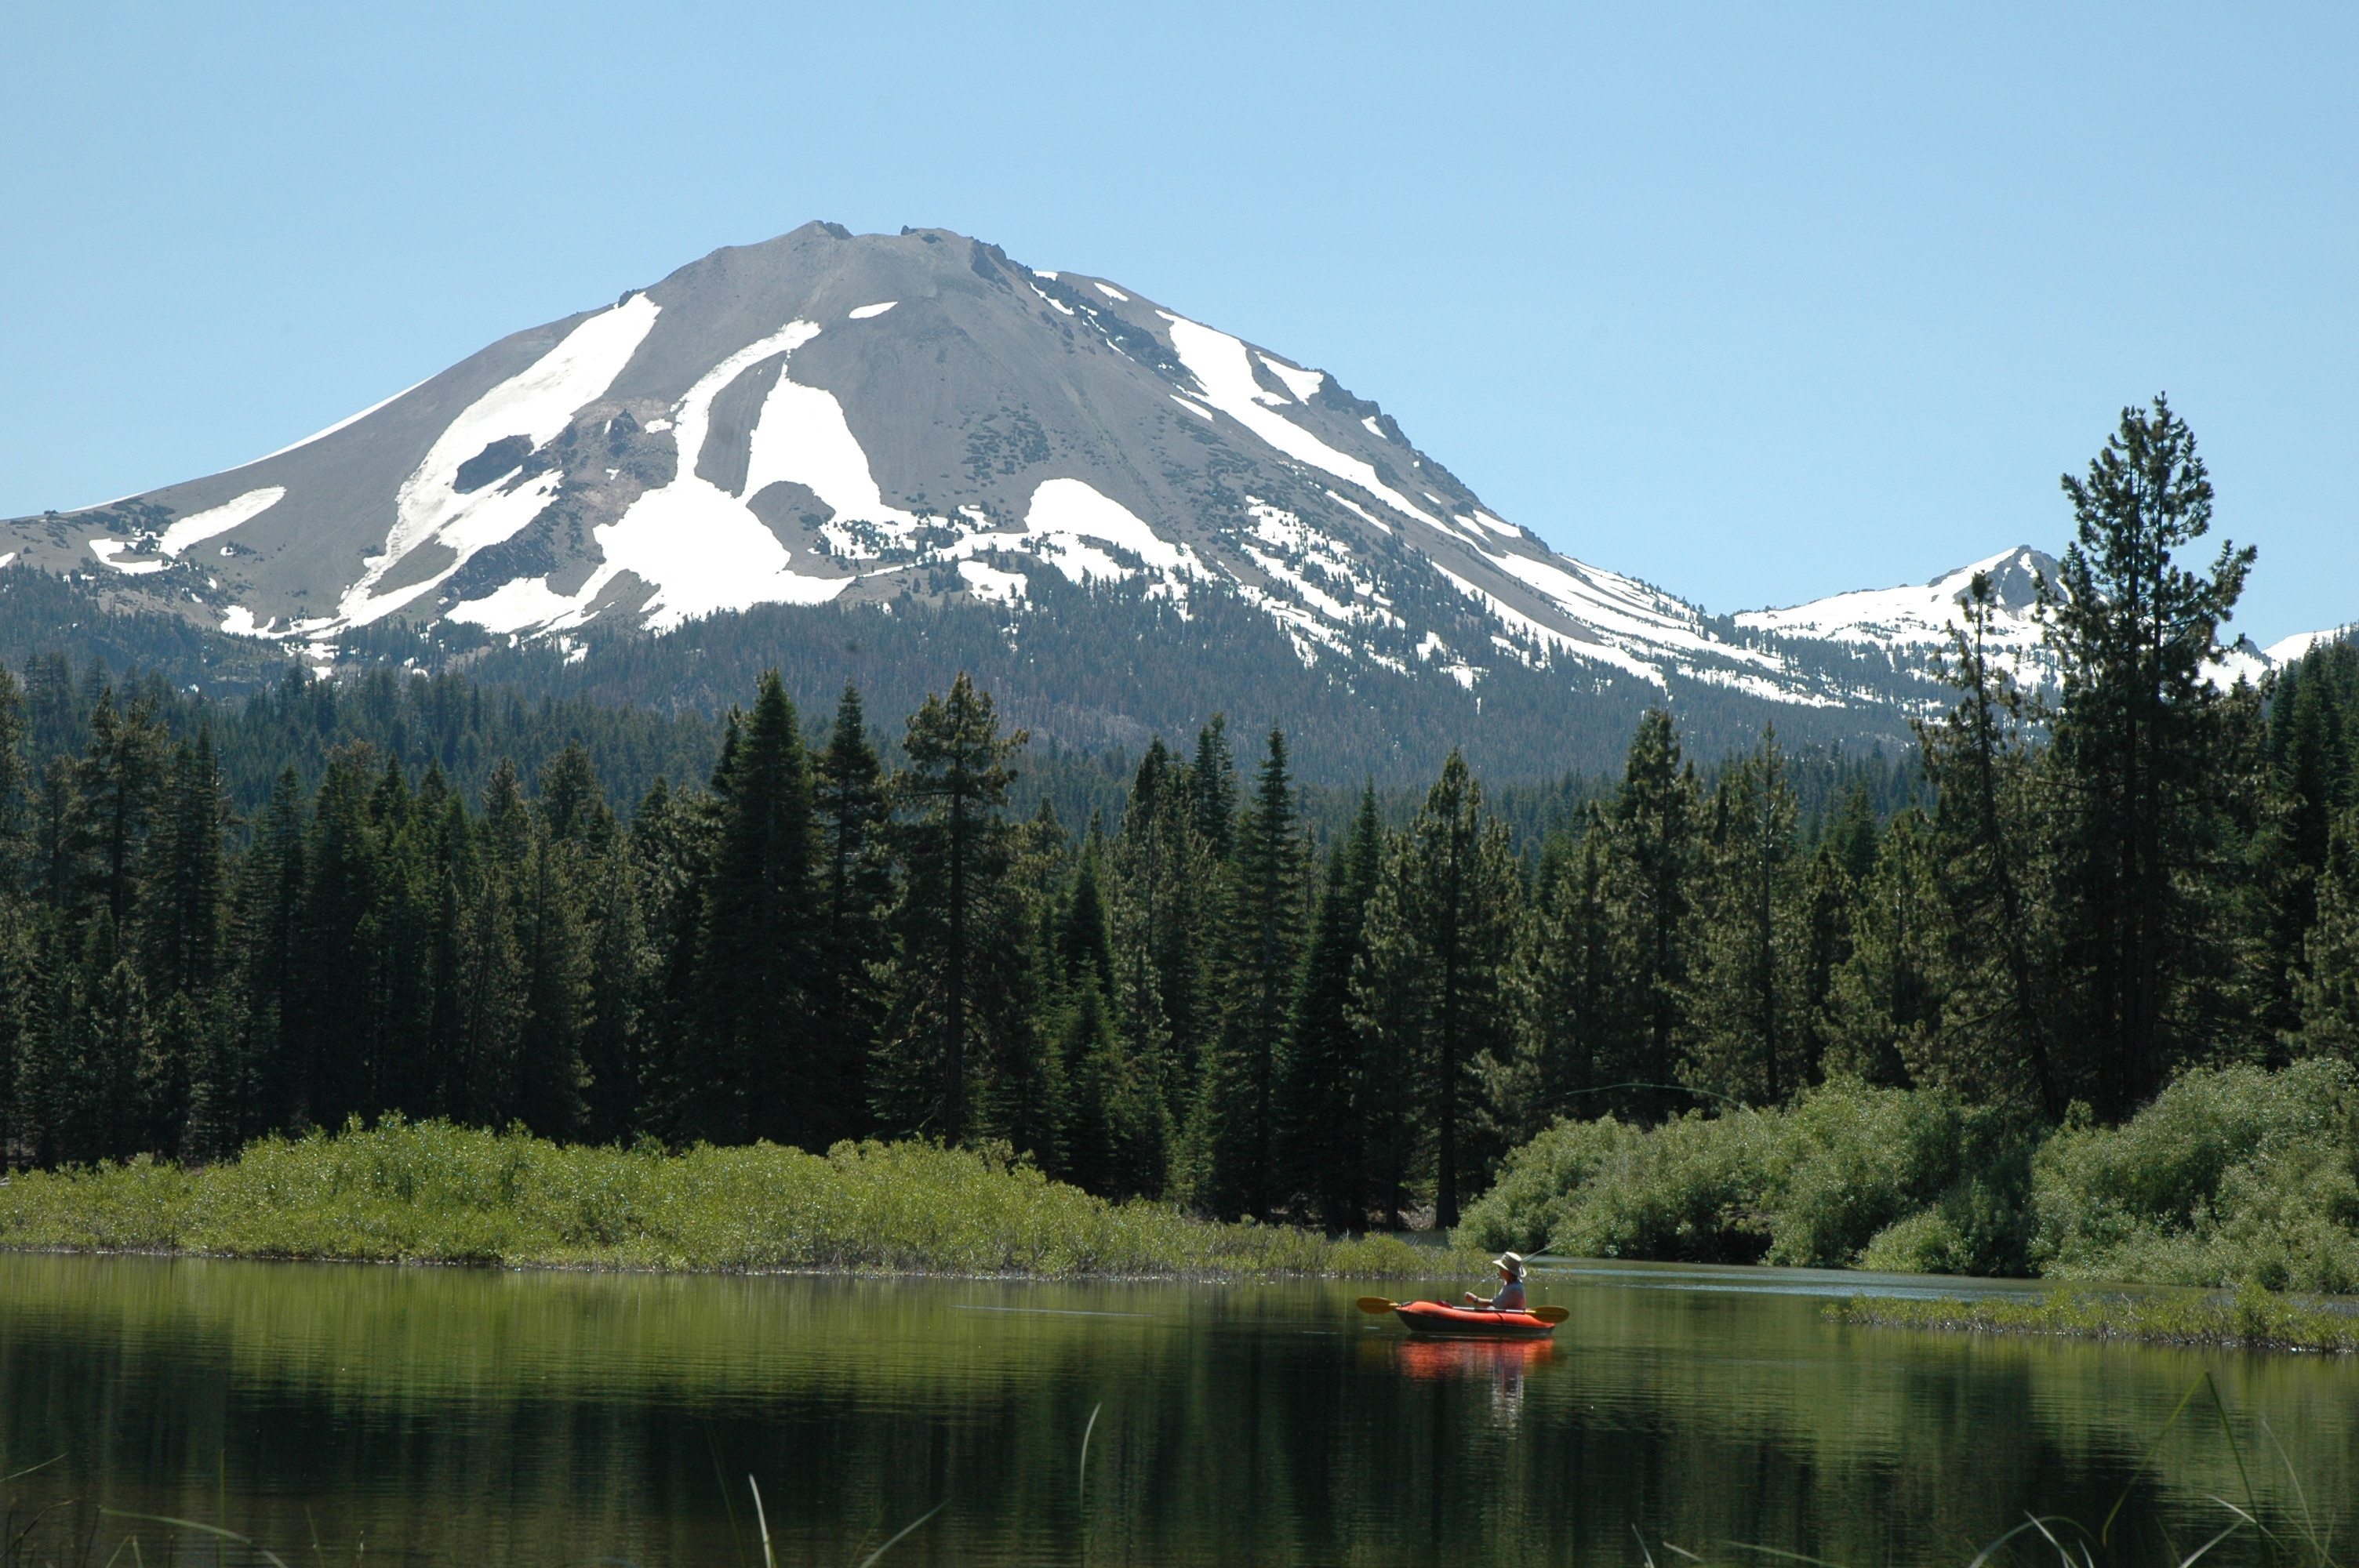 A fisherman casts a line from a boat below a snow-dotted volcanic peak.